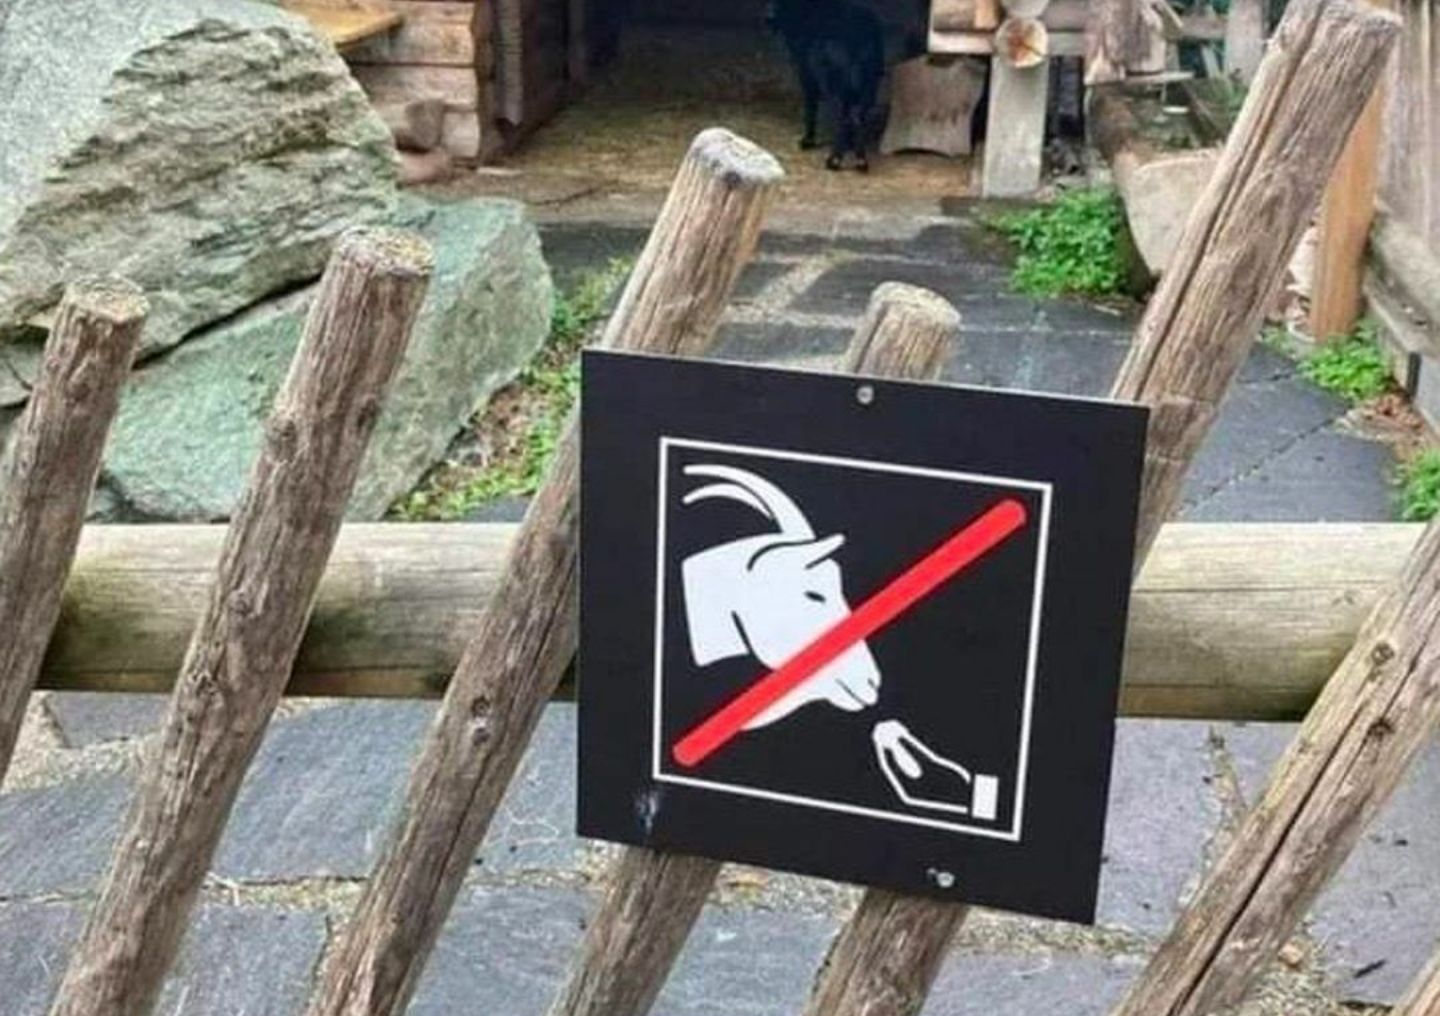 It is forbidden to speak italian with the goat